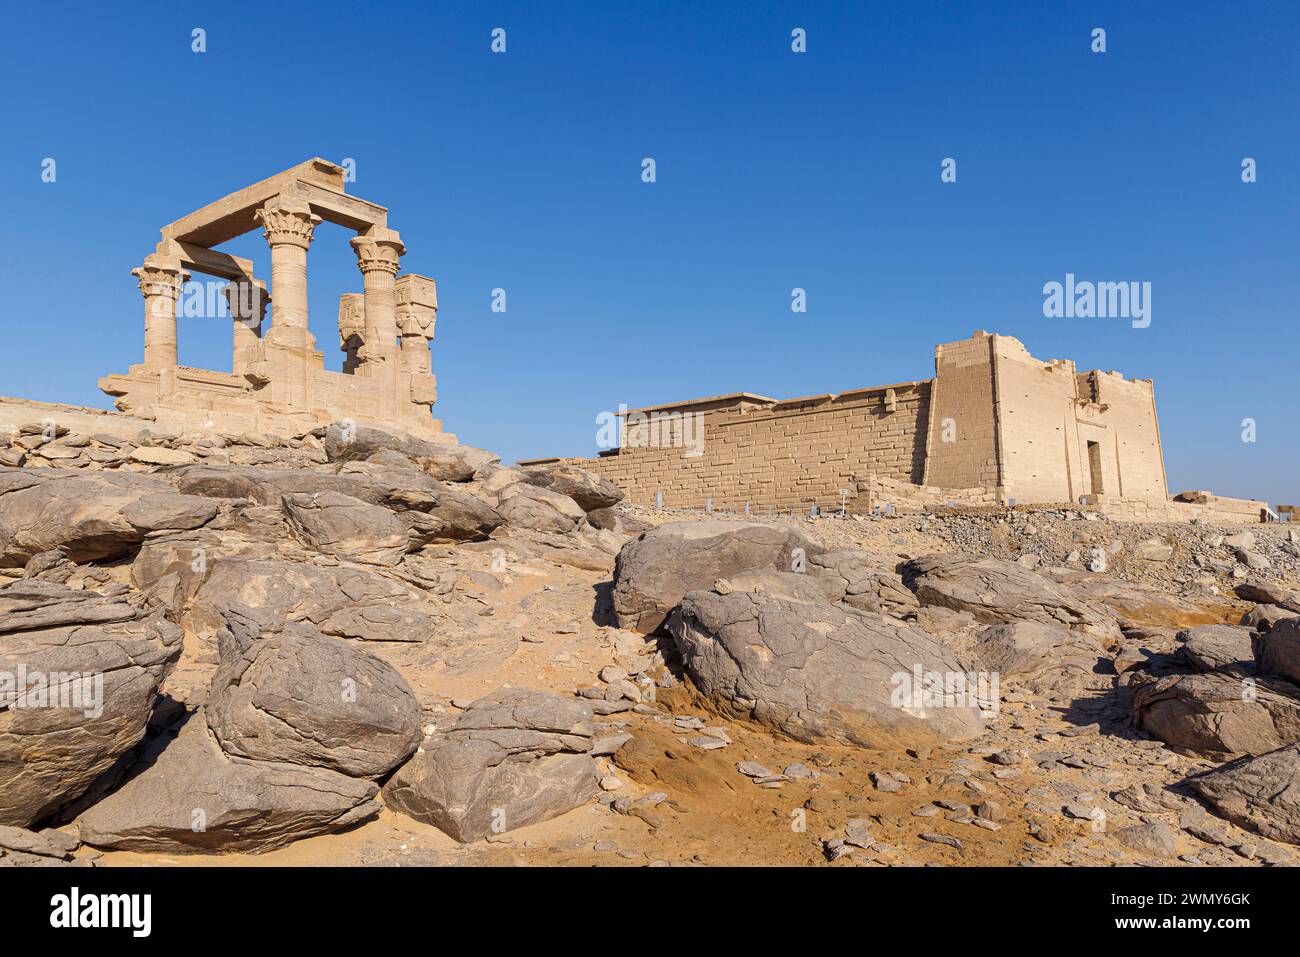 Egypt, Aswan, Nubian Monuments from Abu Simbel to Philae listed as World Heritage by UNESCO, Qertassi kiosk adn Kalabsha temple Stock Photo